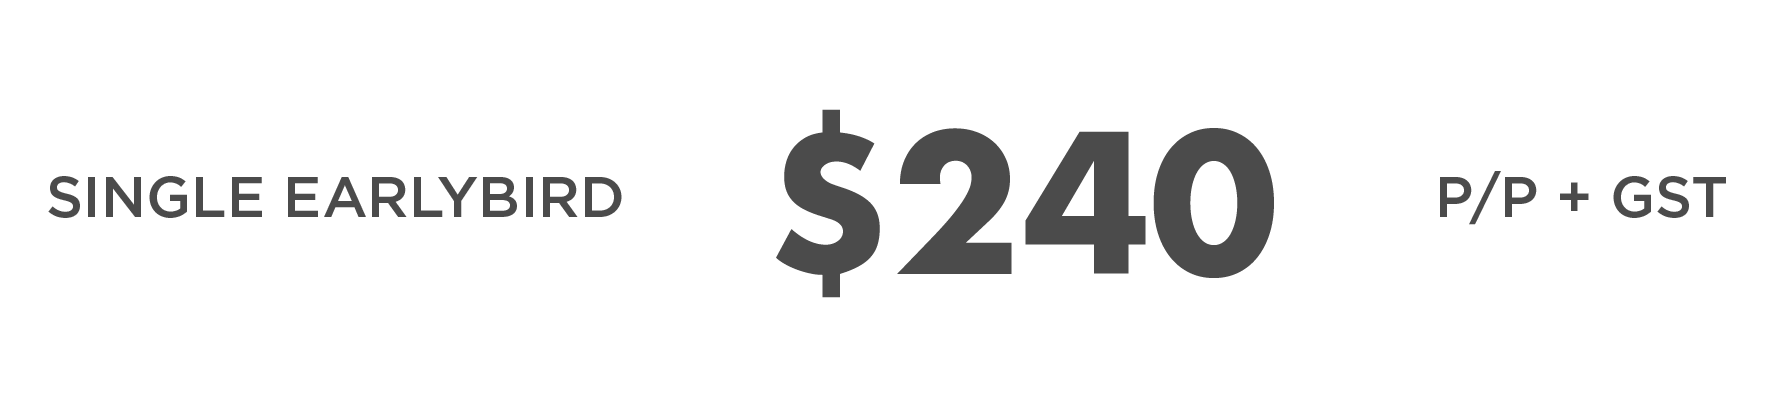 pricing-02.png